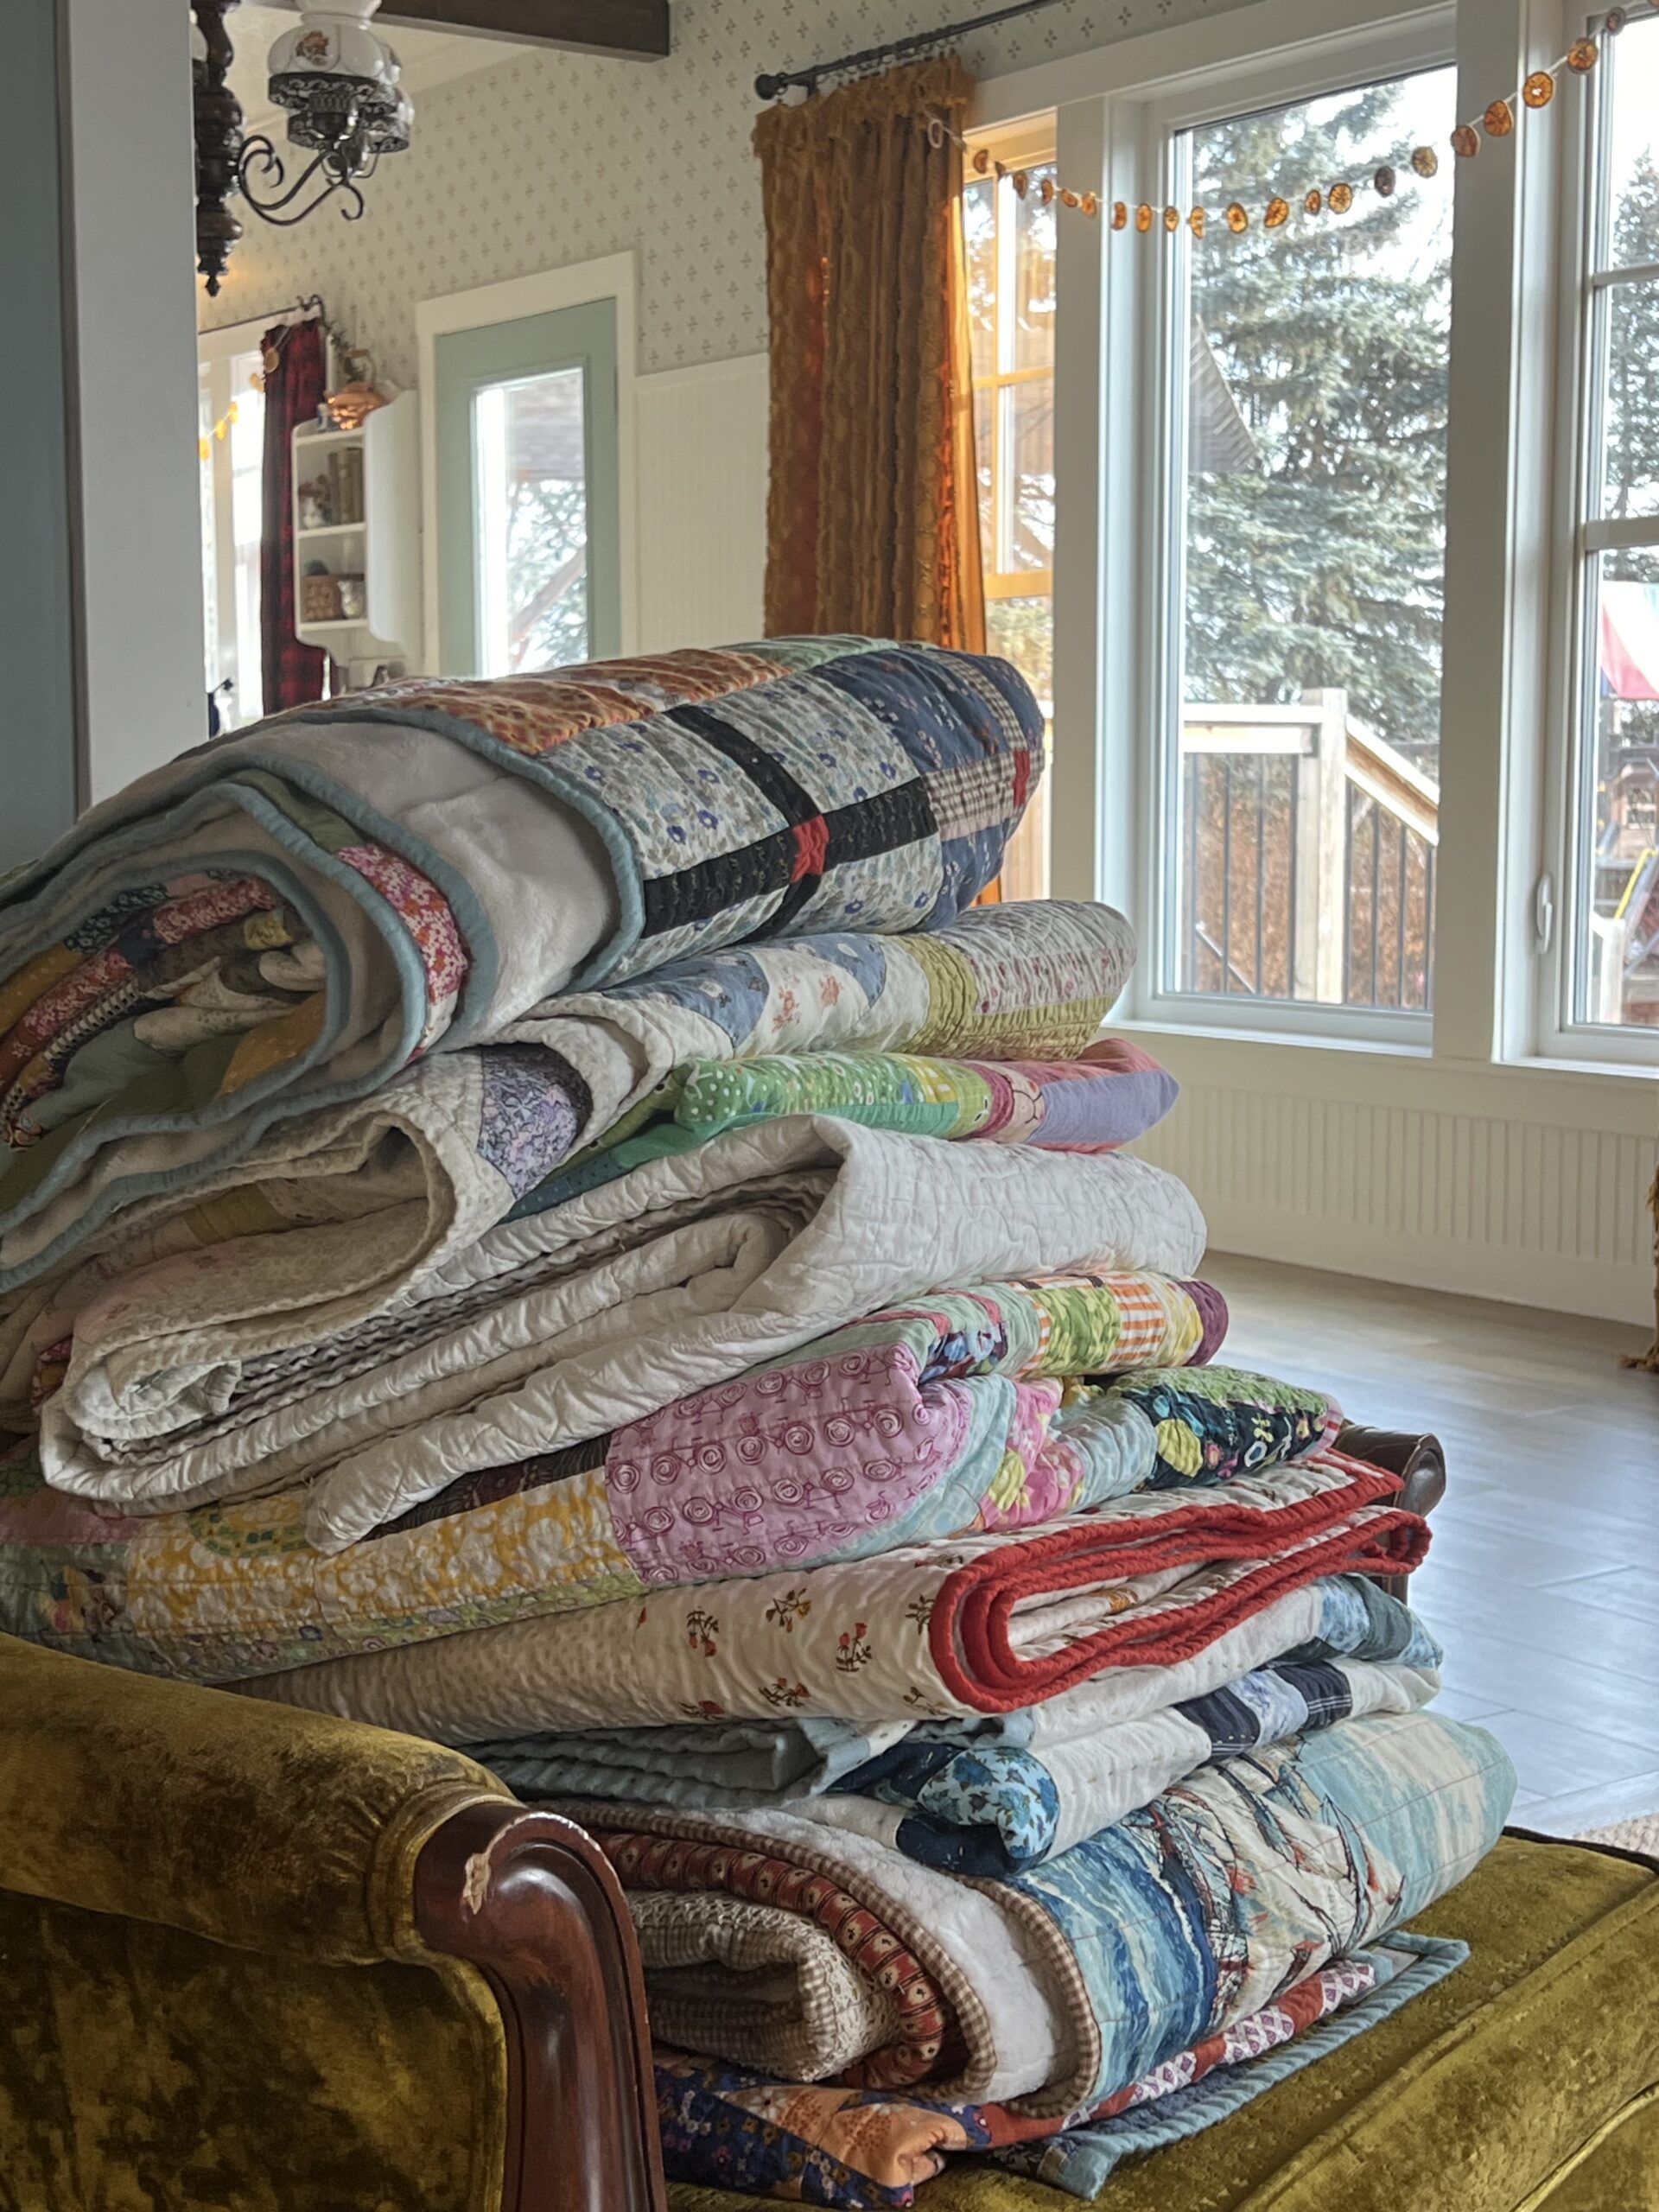 What Do I Do With All My Quilts?